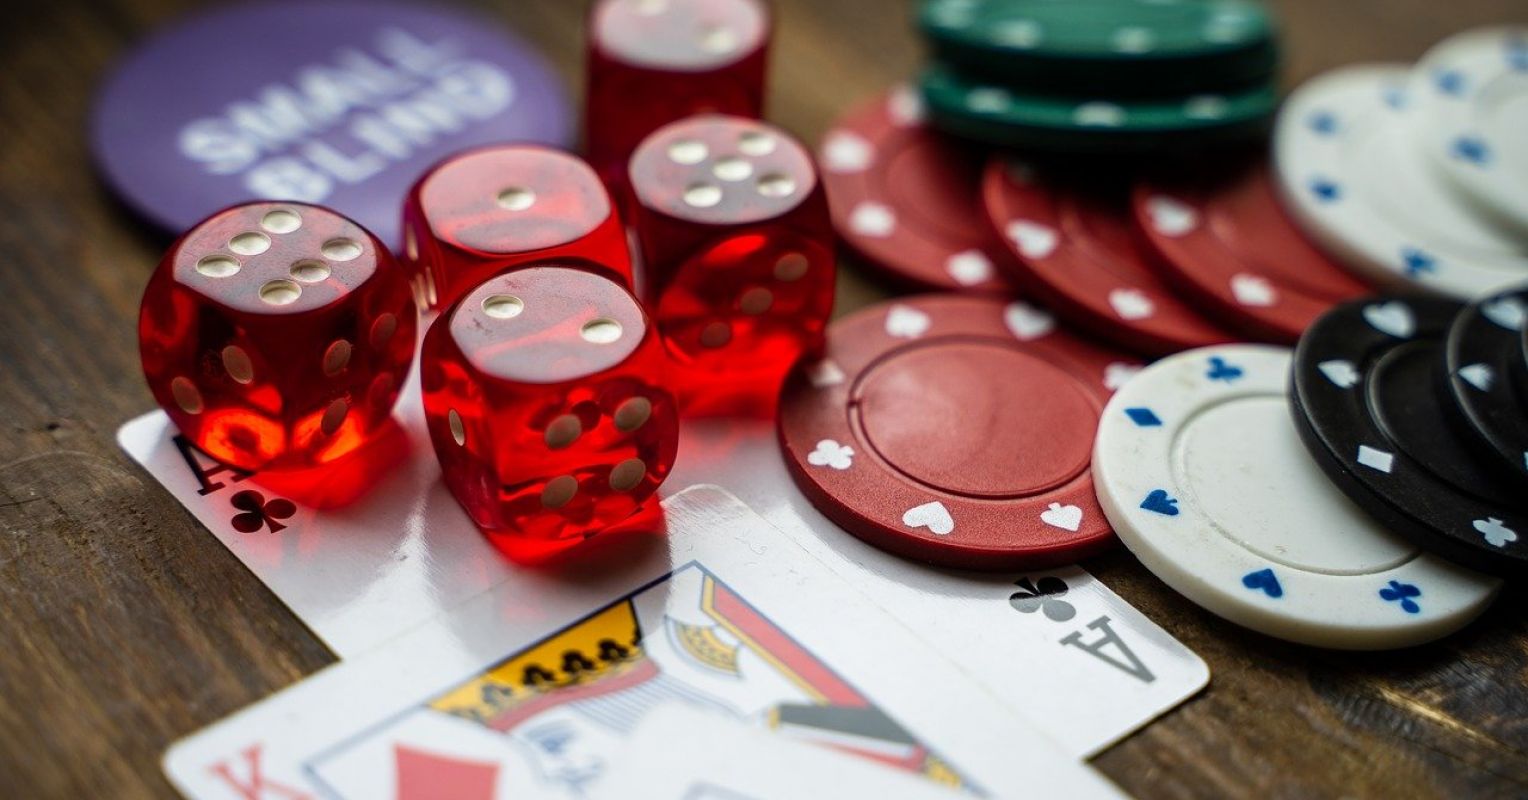 A Meaningful Life Includes Gambling for the Desired Outcome | Psychology Today